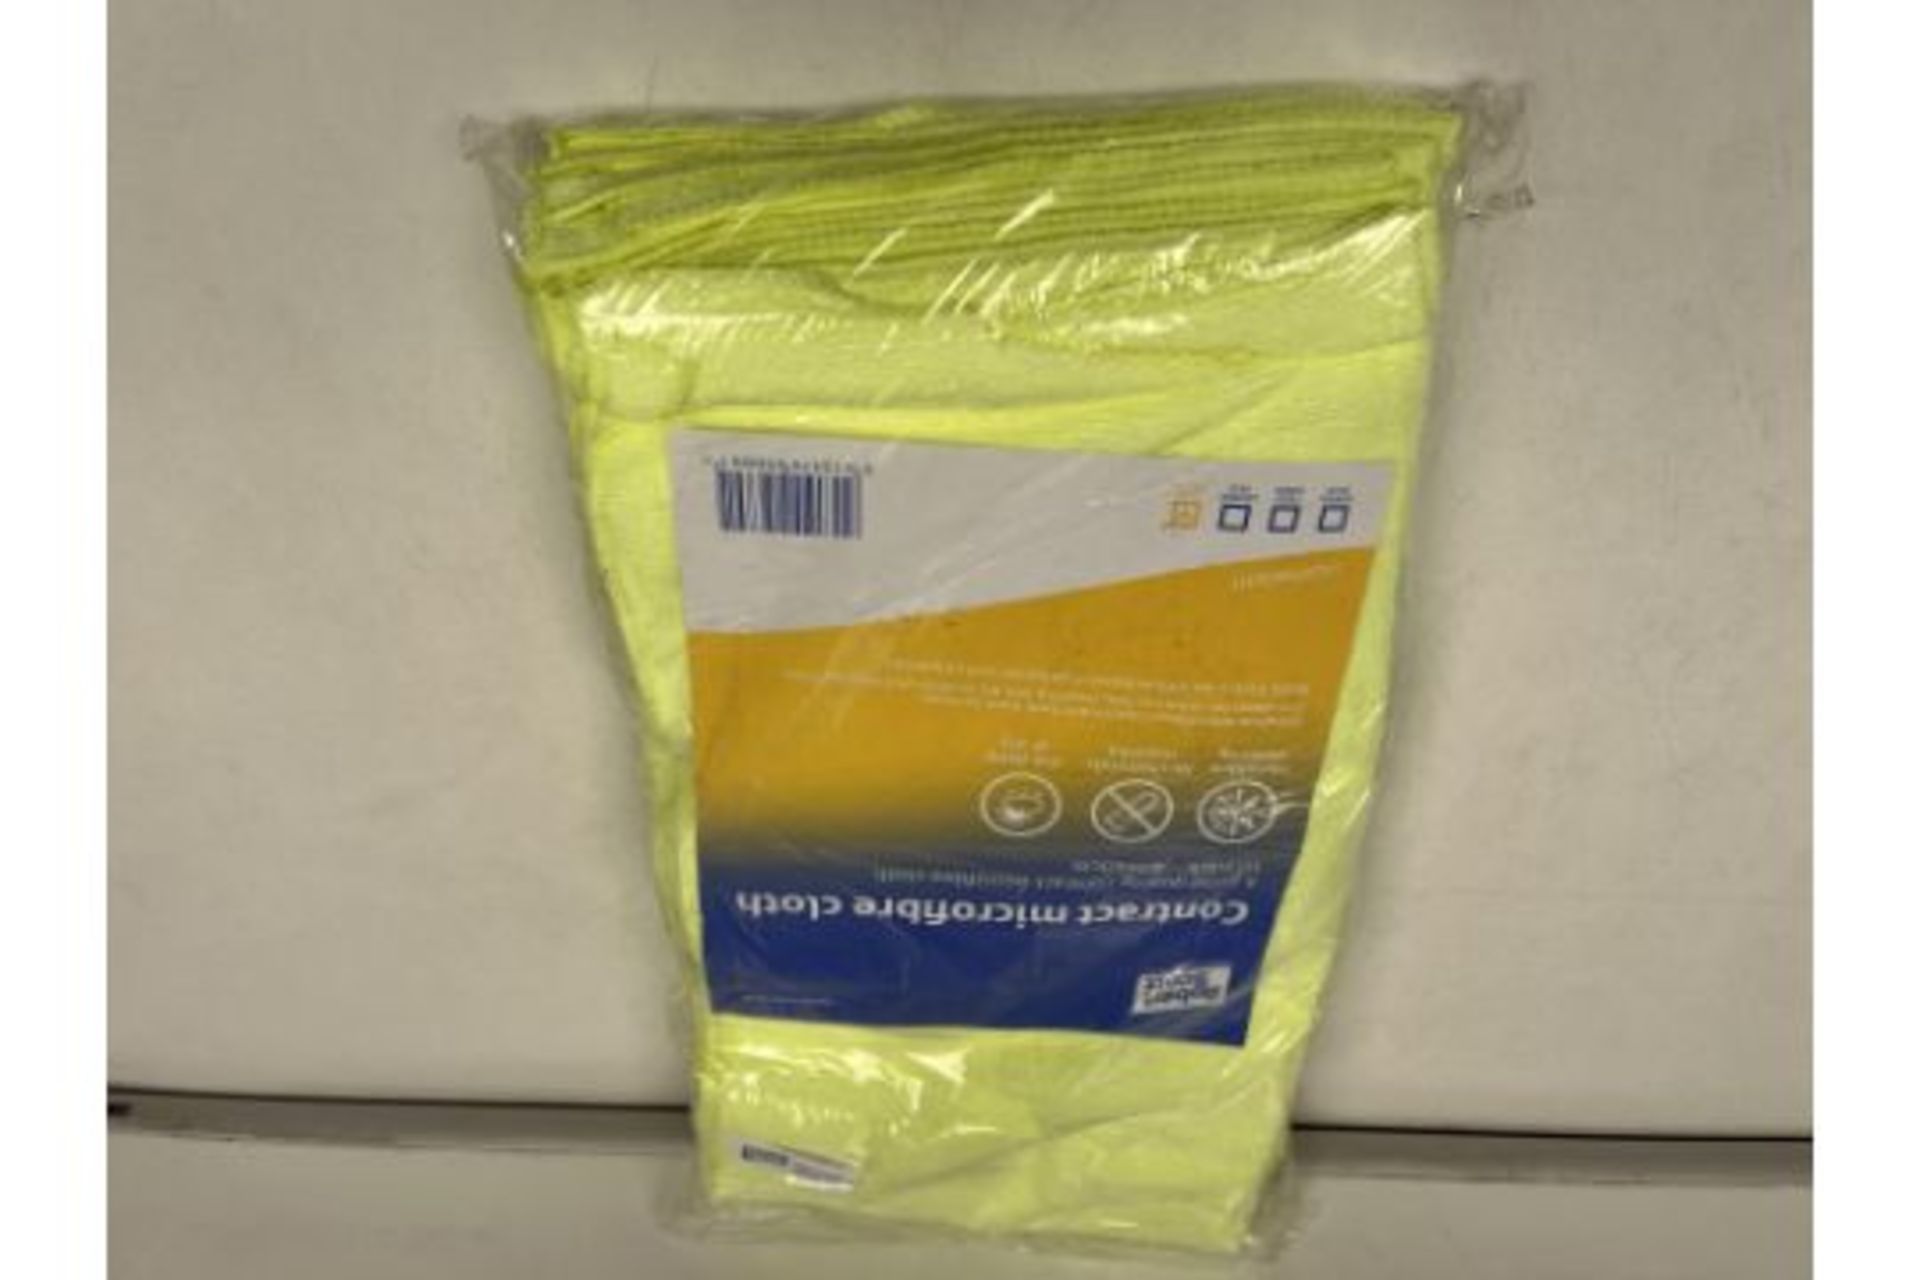 200 X NEW PACKAGED ROBERT SCOTT CONTRACT MICROFIBRE CLOTHS. 40X40CM. MICROFIBRE CLEANING. NO